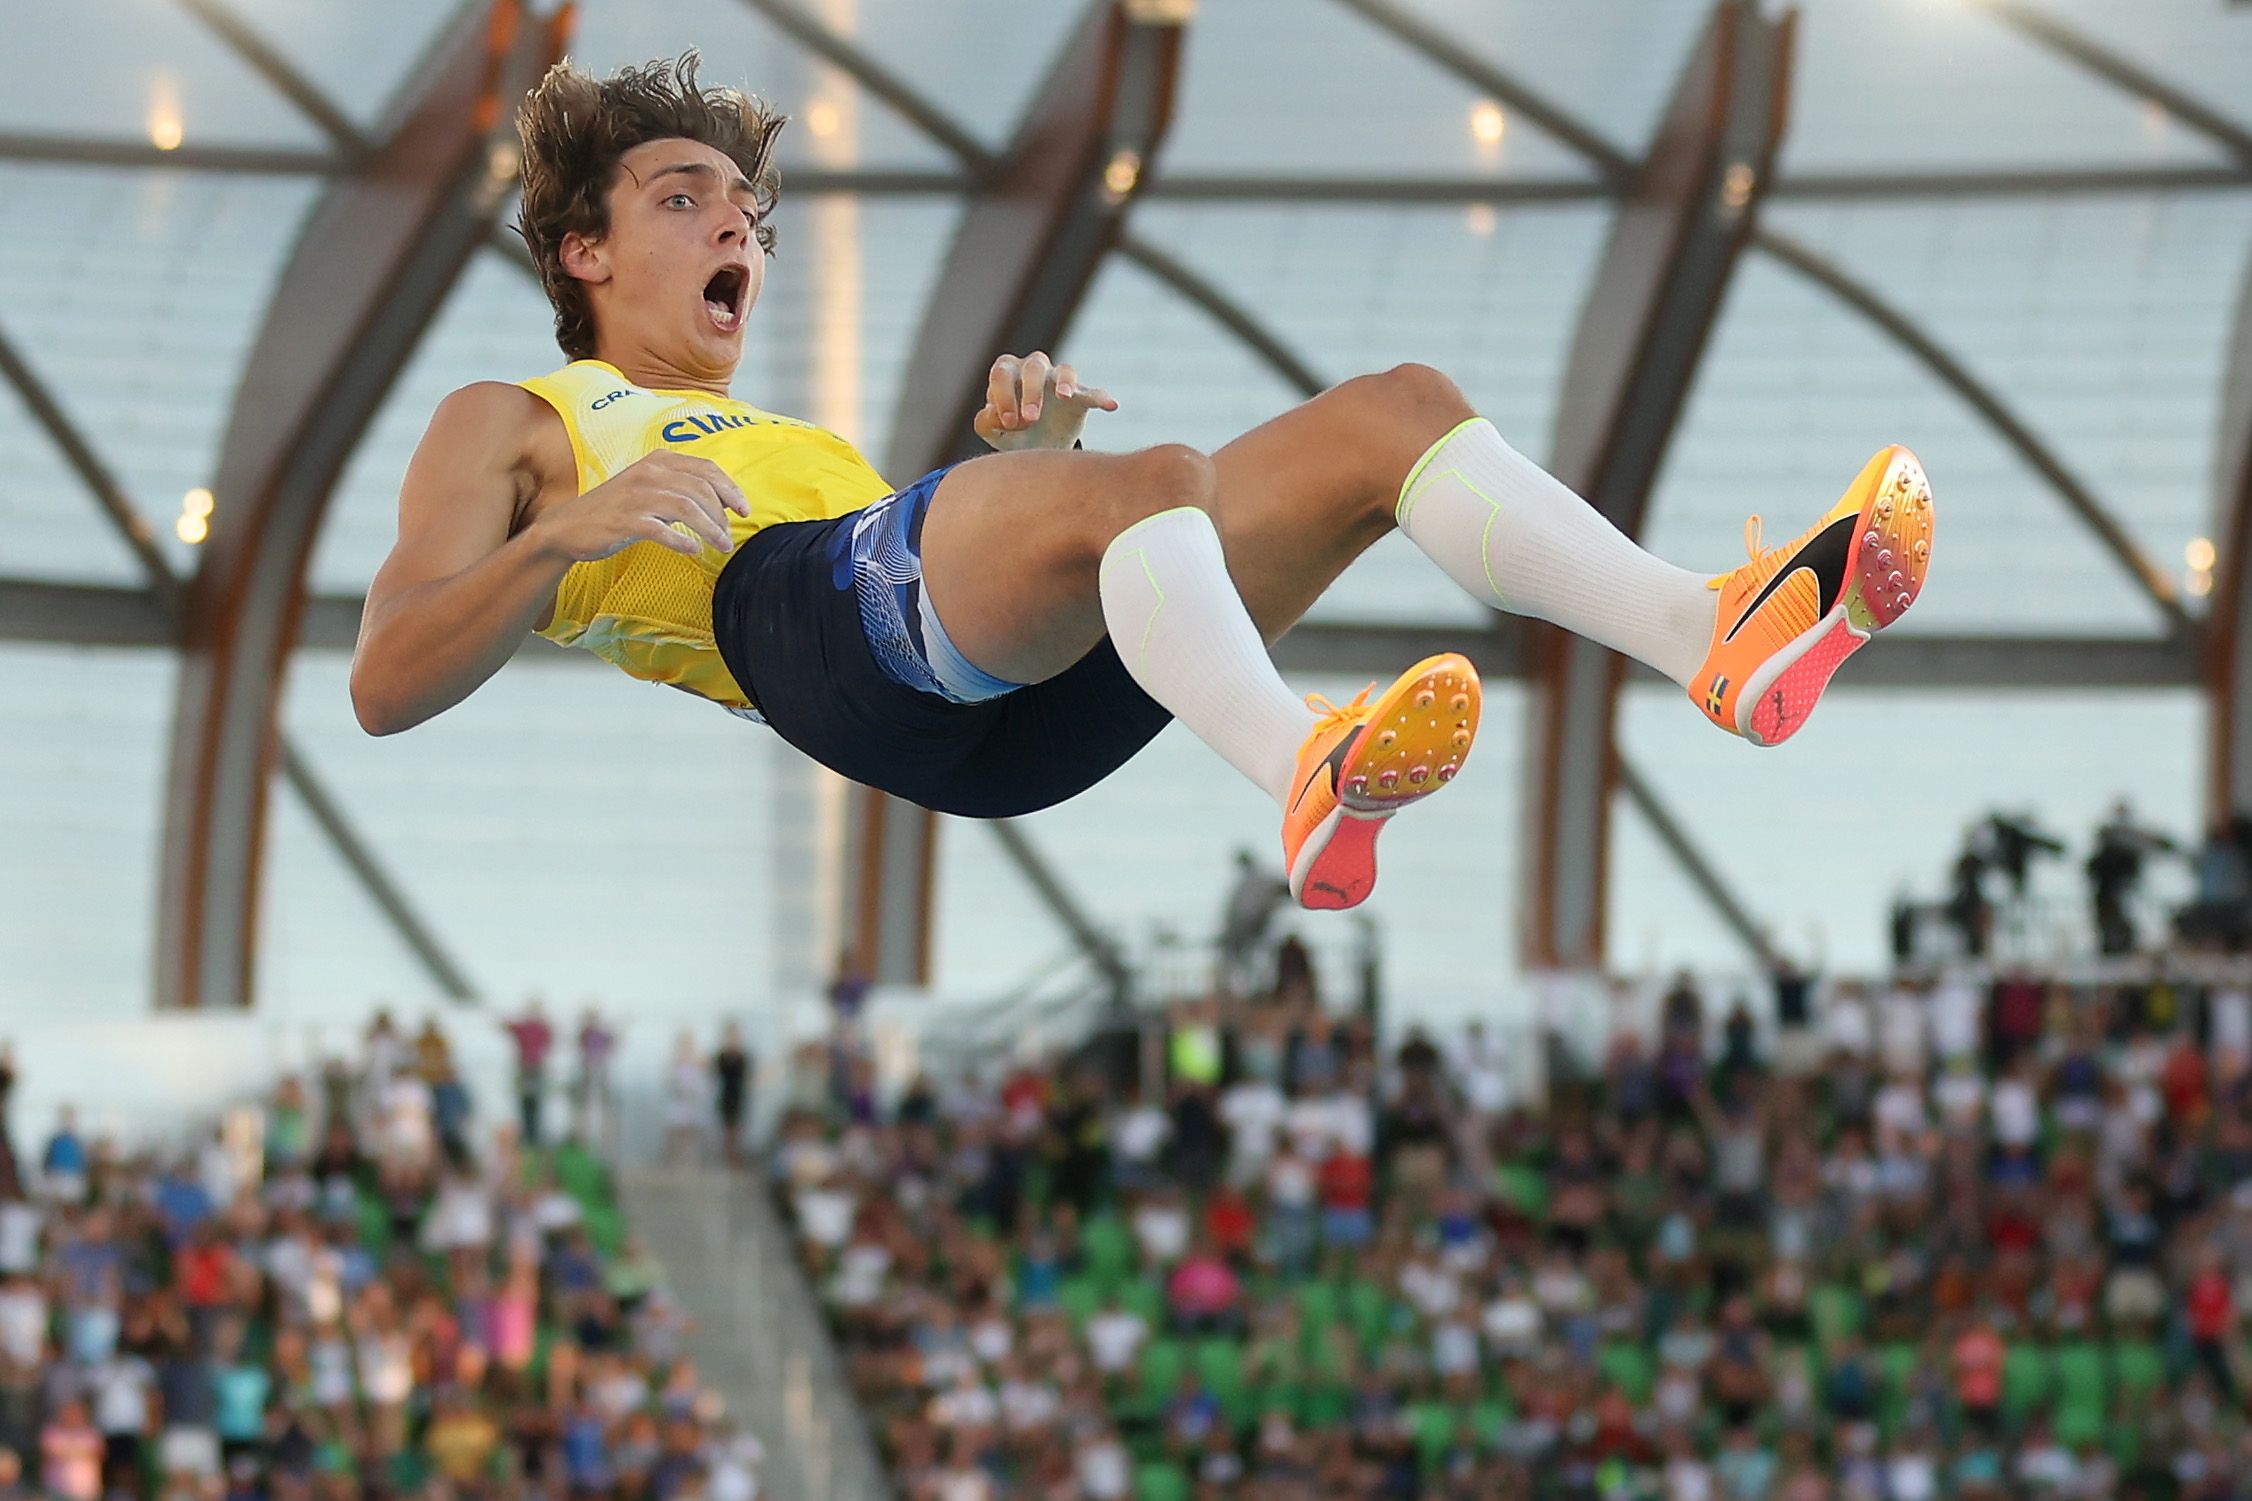 Mondo Duplantis reacts after breaking the world pole vault record at the World Athletics Championships Oregon22